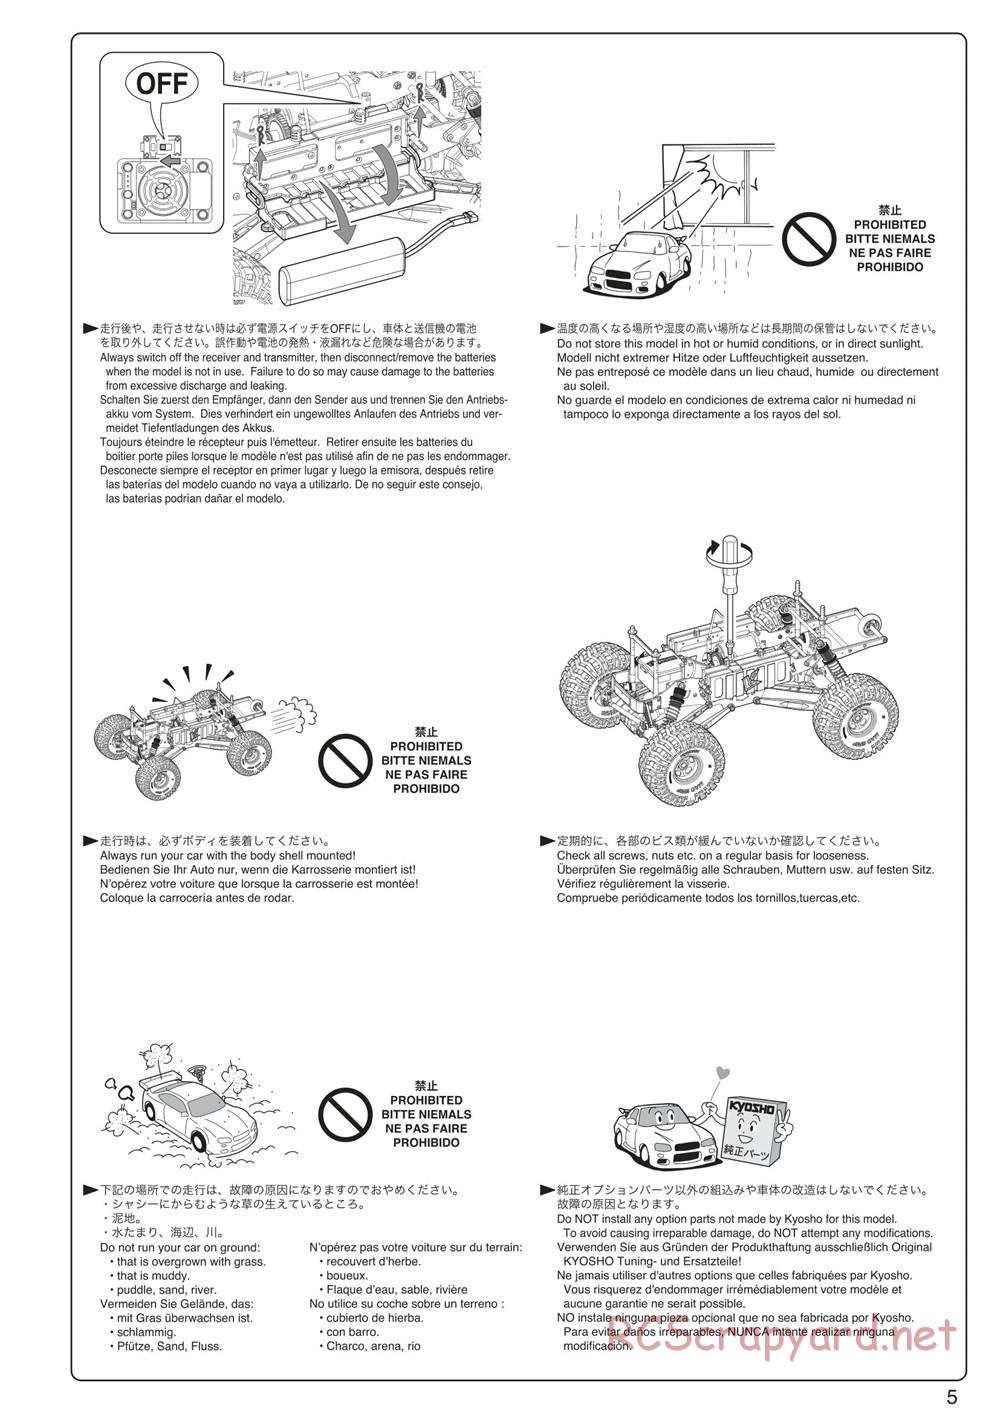 Kyosho - Mad Crusher VE - Manual - Page 5